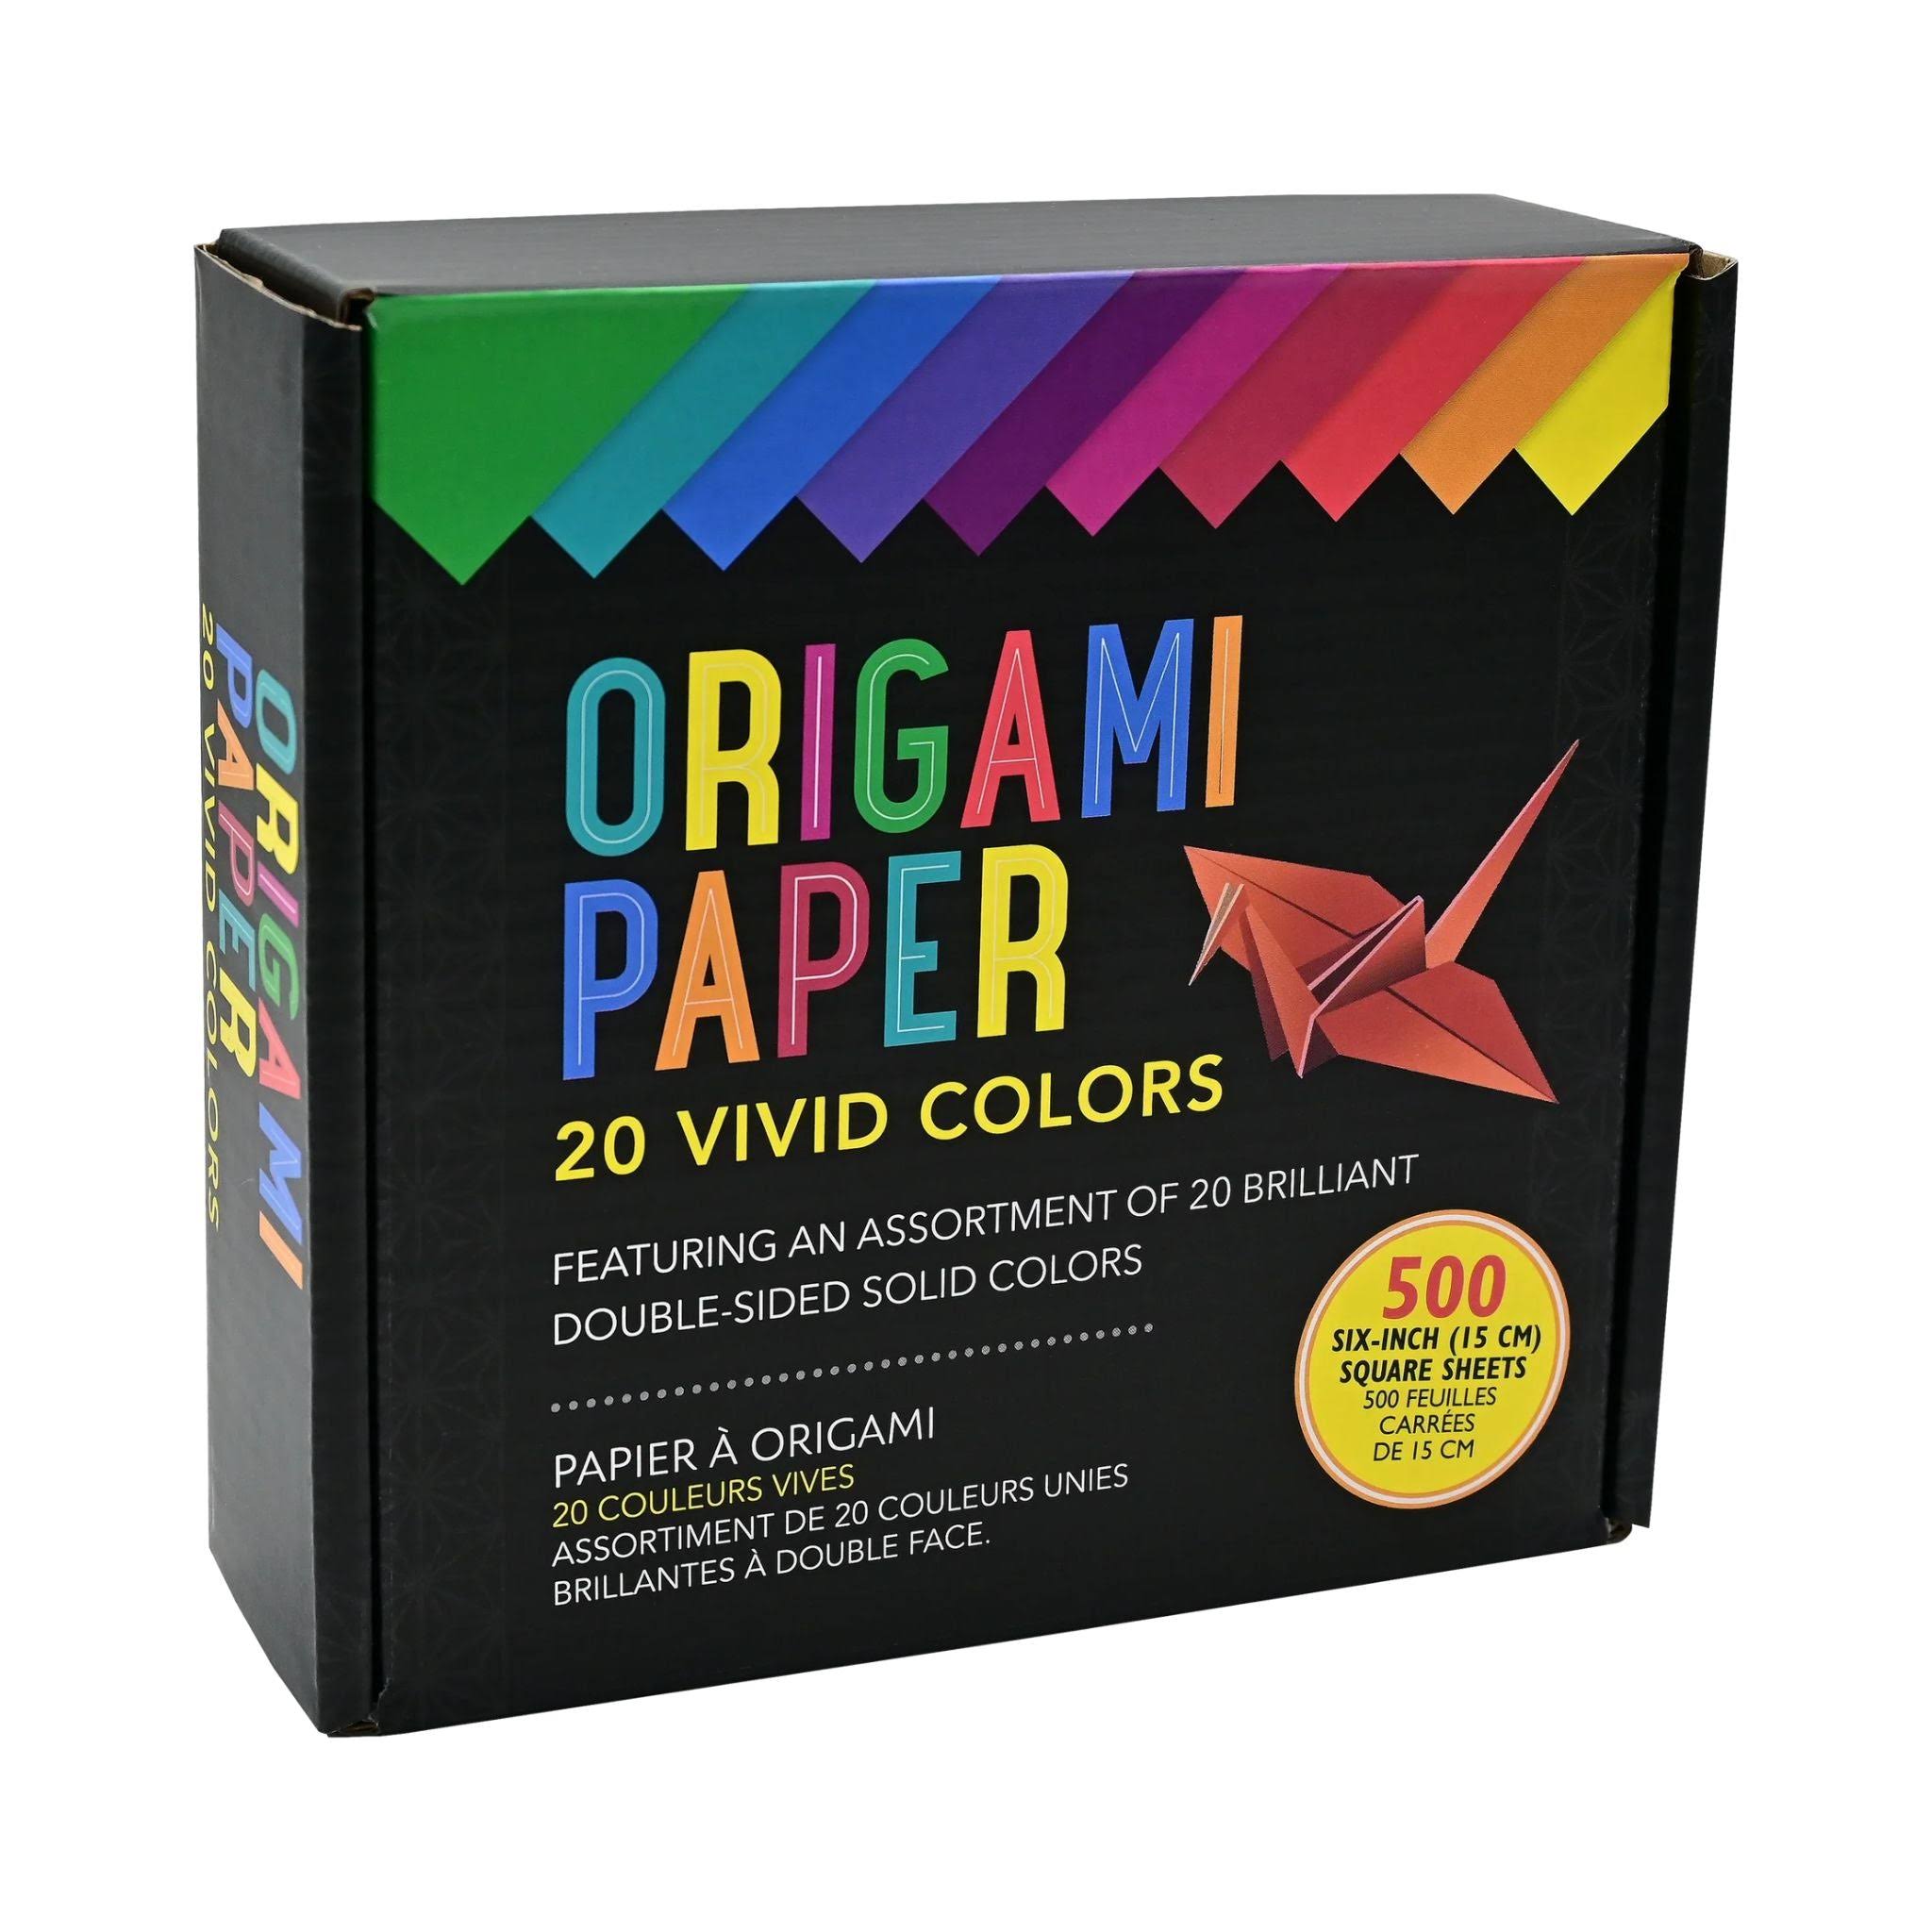 Origami Papers Vivid Colours Boxed Set - 500 Sheets